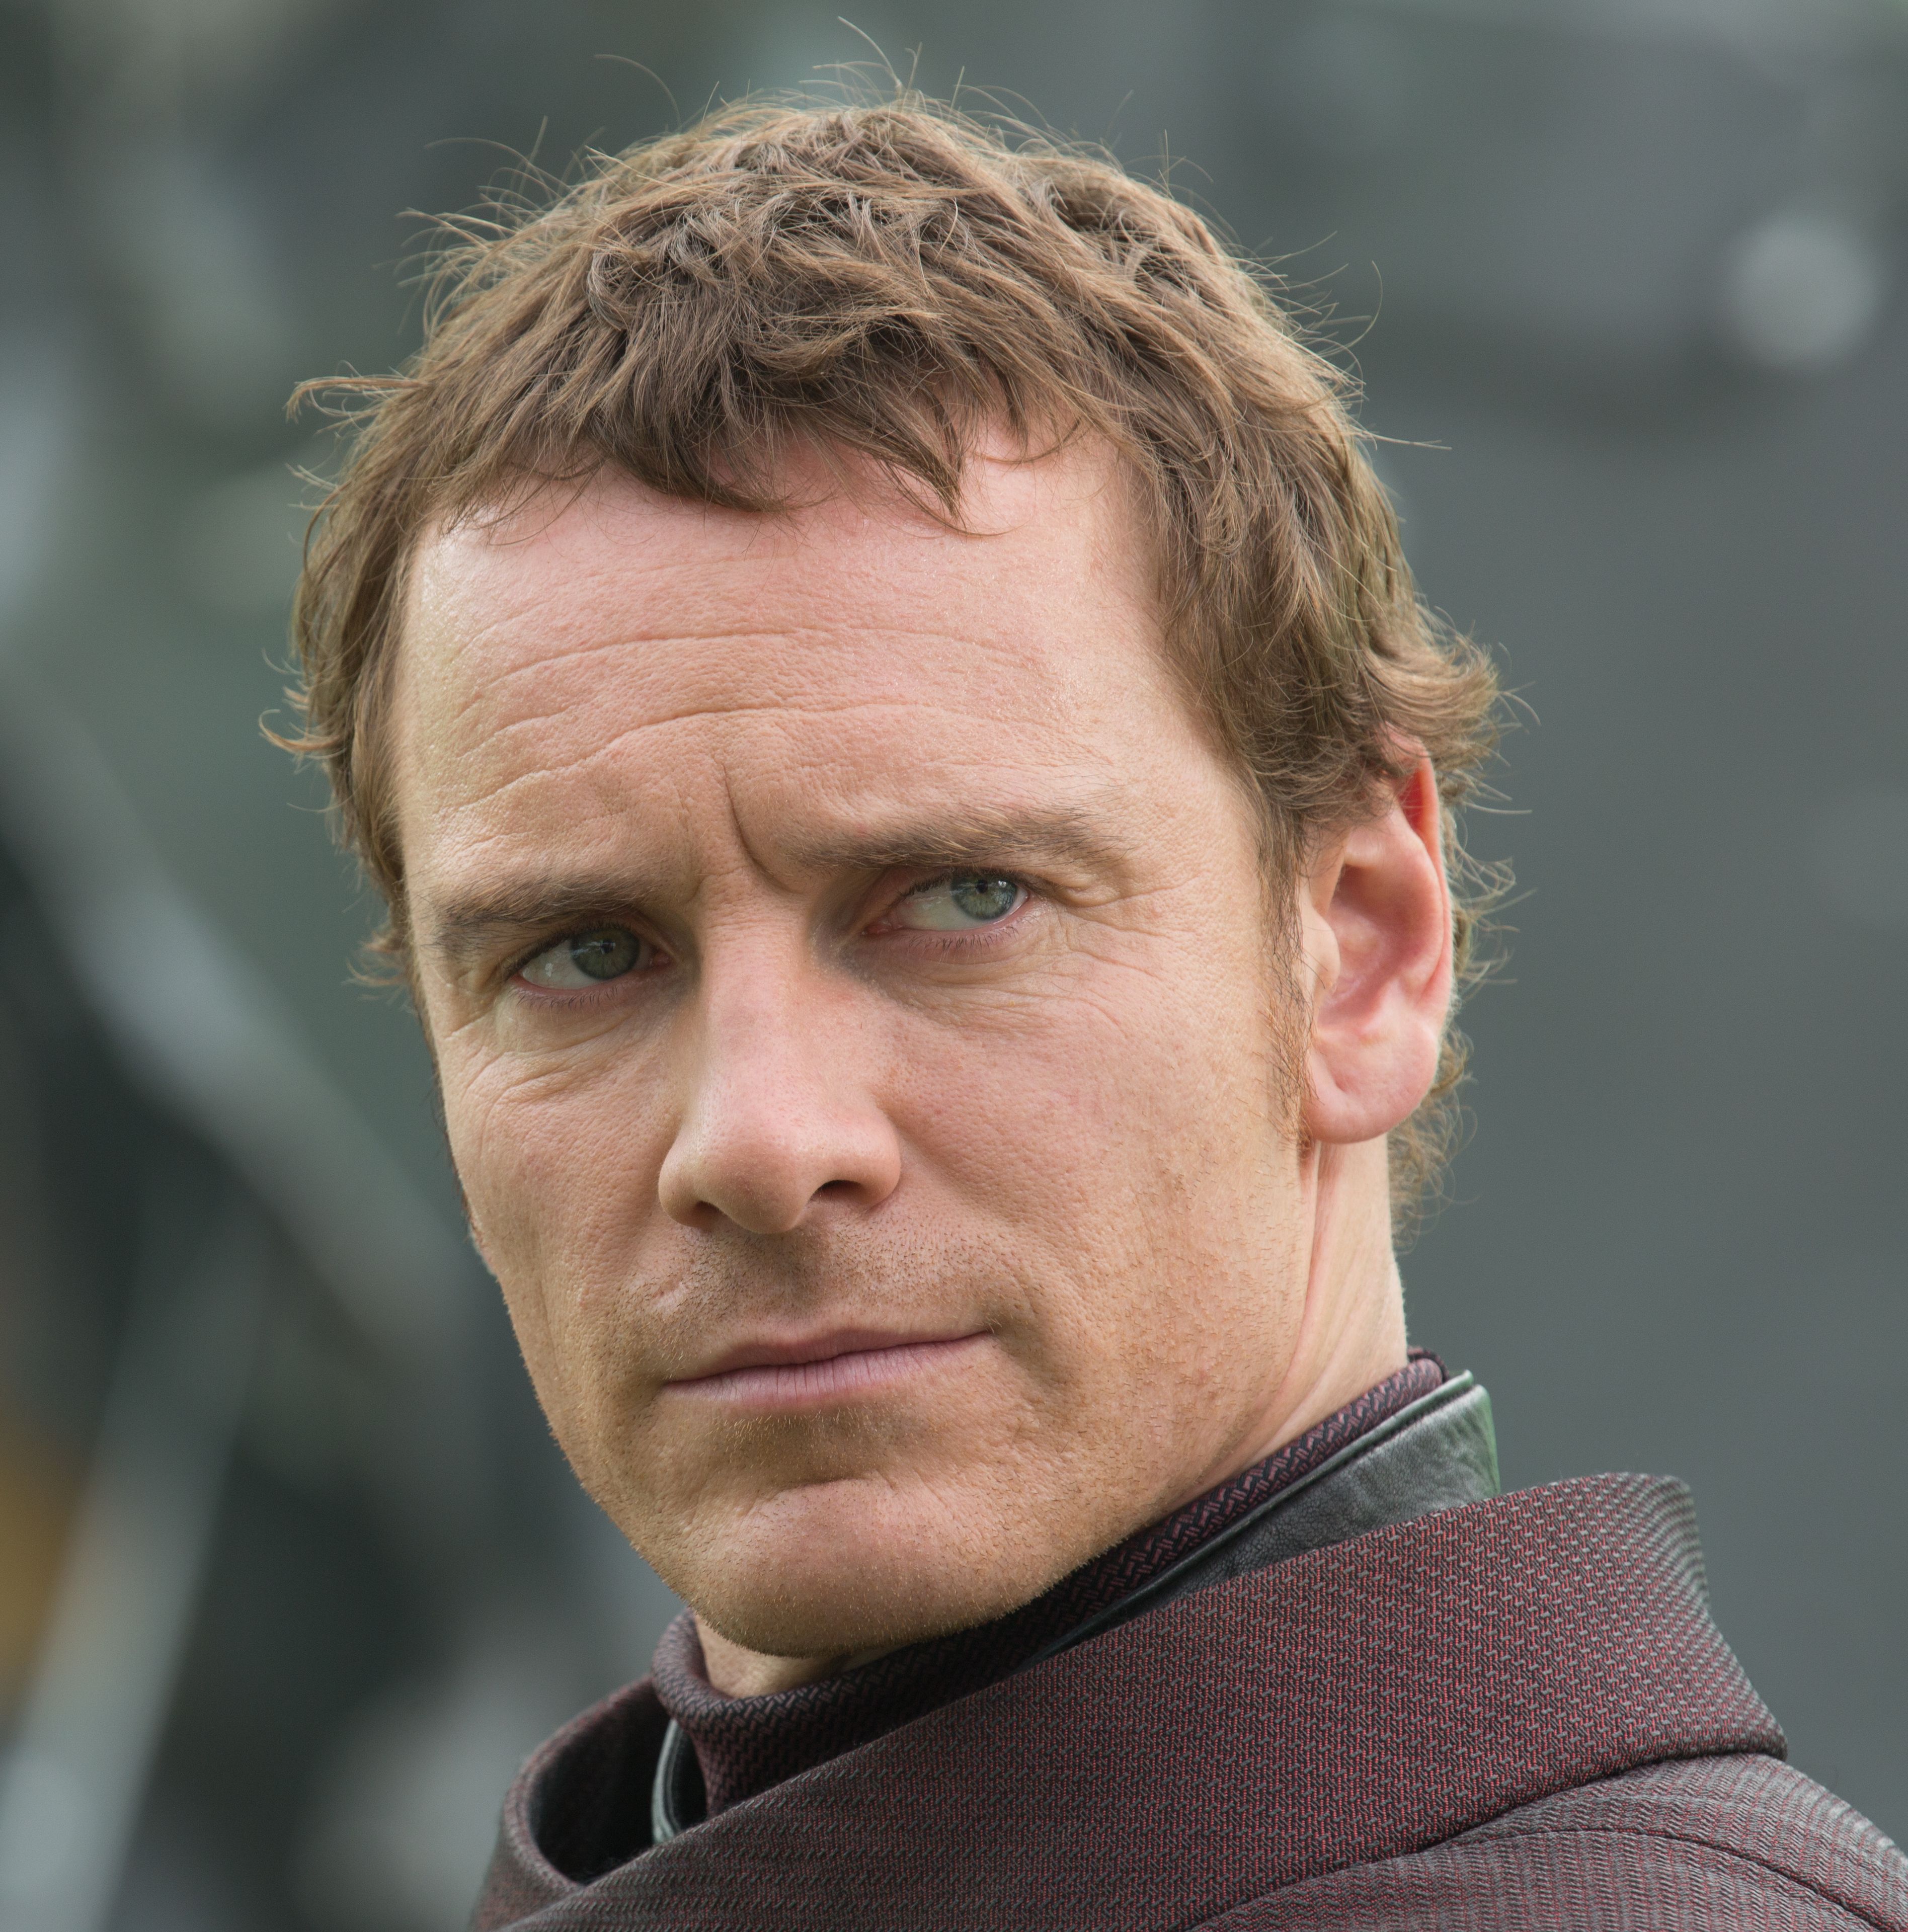 Fassbender as Magneto in X-Men: Days of Future Past